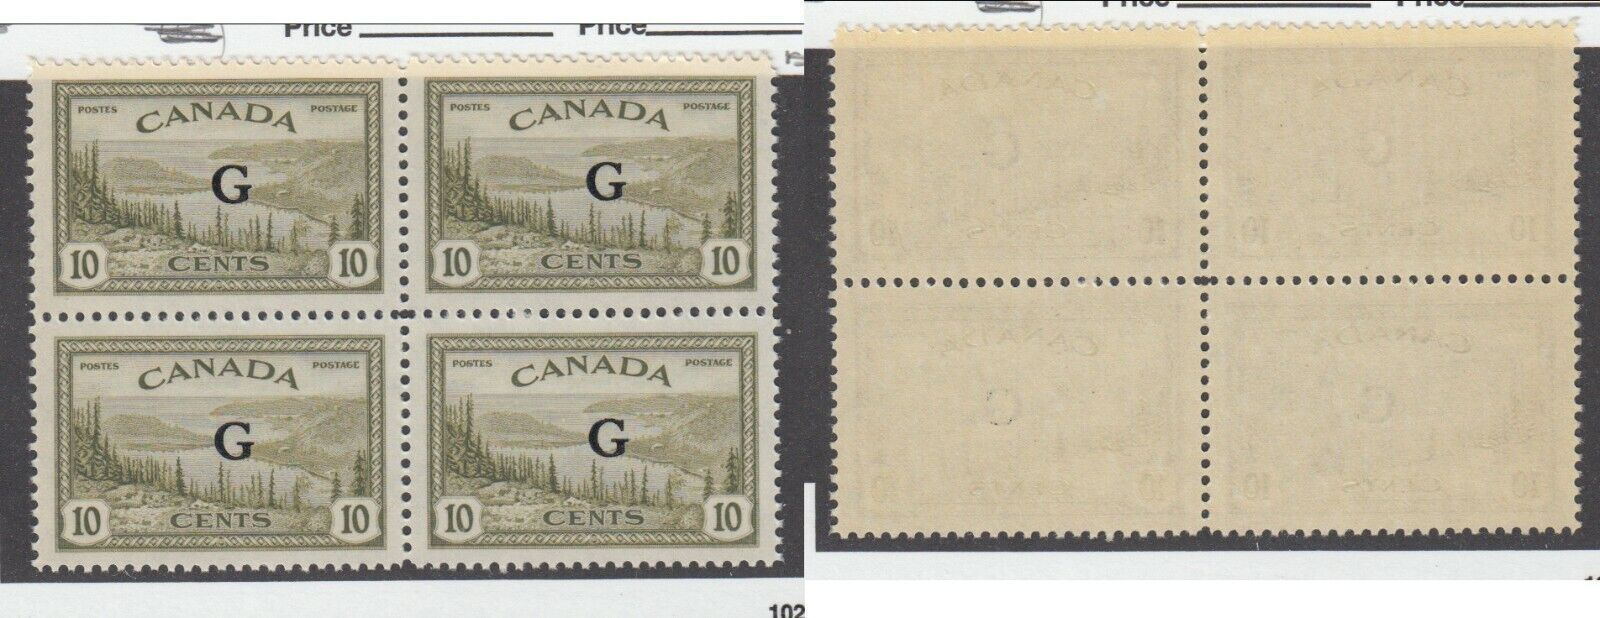 MNH Canada 10 Cent G Official #O21 4 #RN200 Lot Ranking TOP7 Mail order Block of